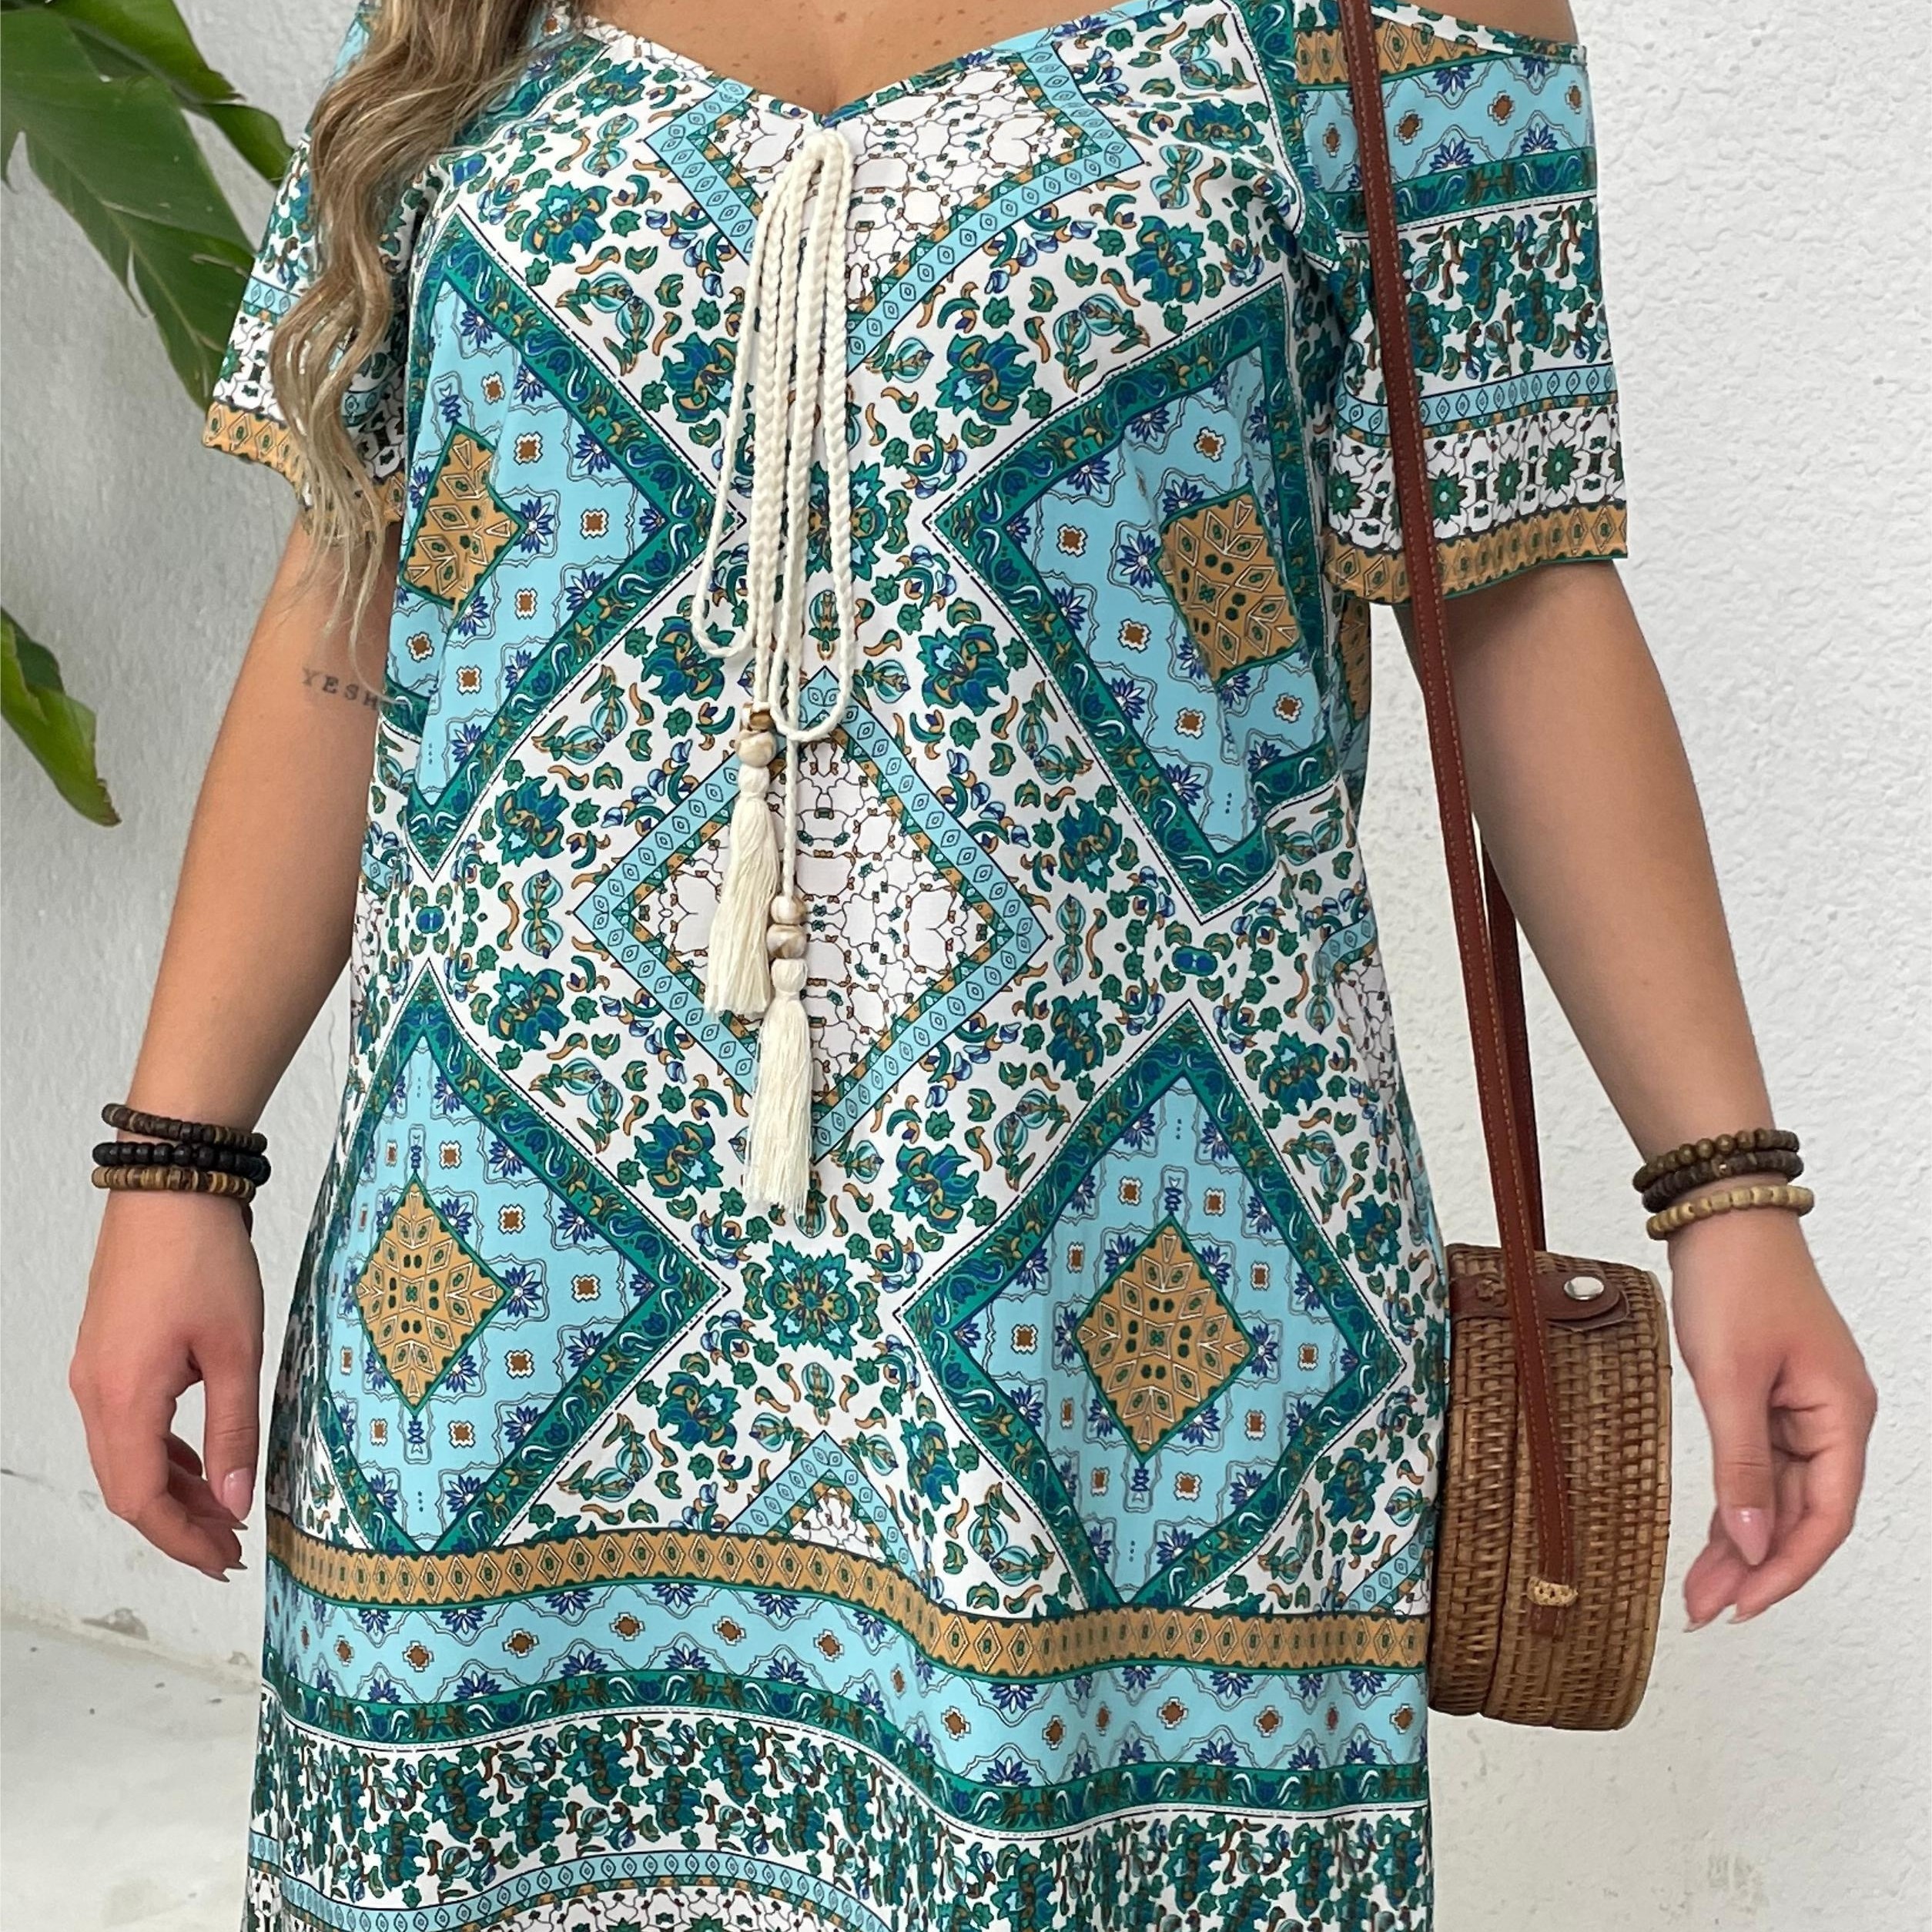 

Plus Size Ethnic Print Backless Cold Shoulder Dress, Boho Tie Front Dress For Spring & Summer, Women's Plus Size Clothing